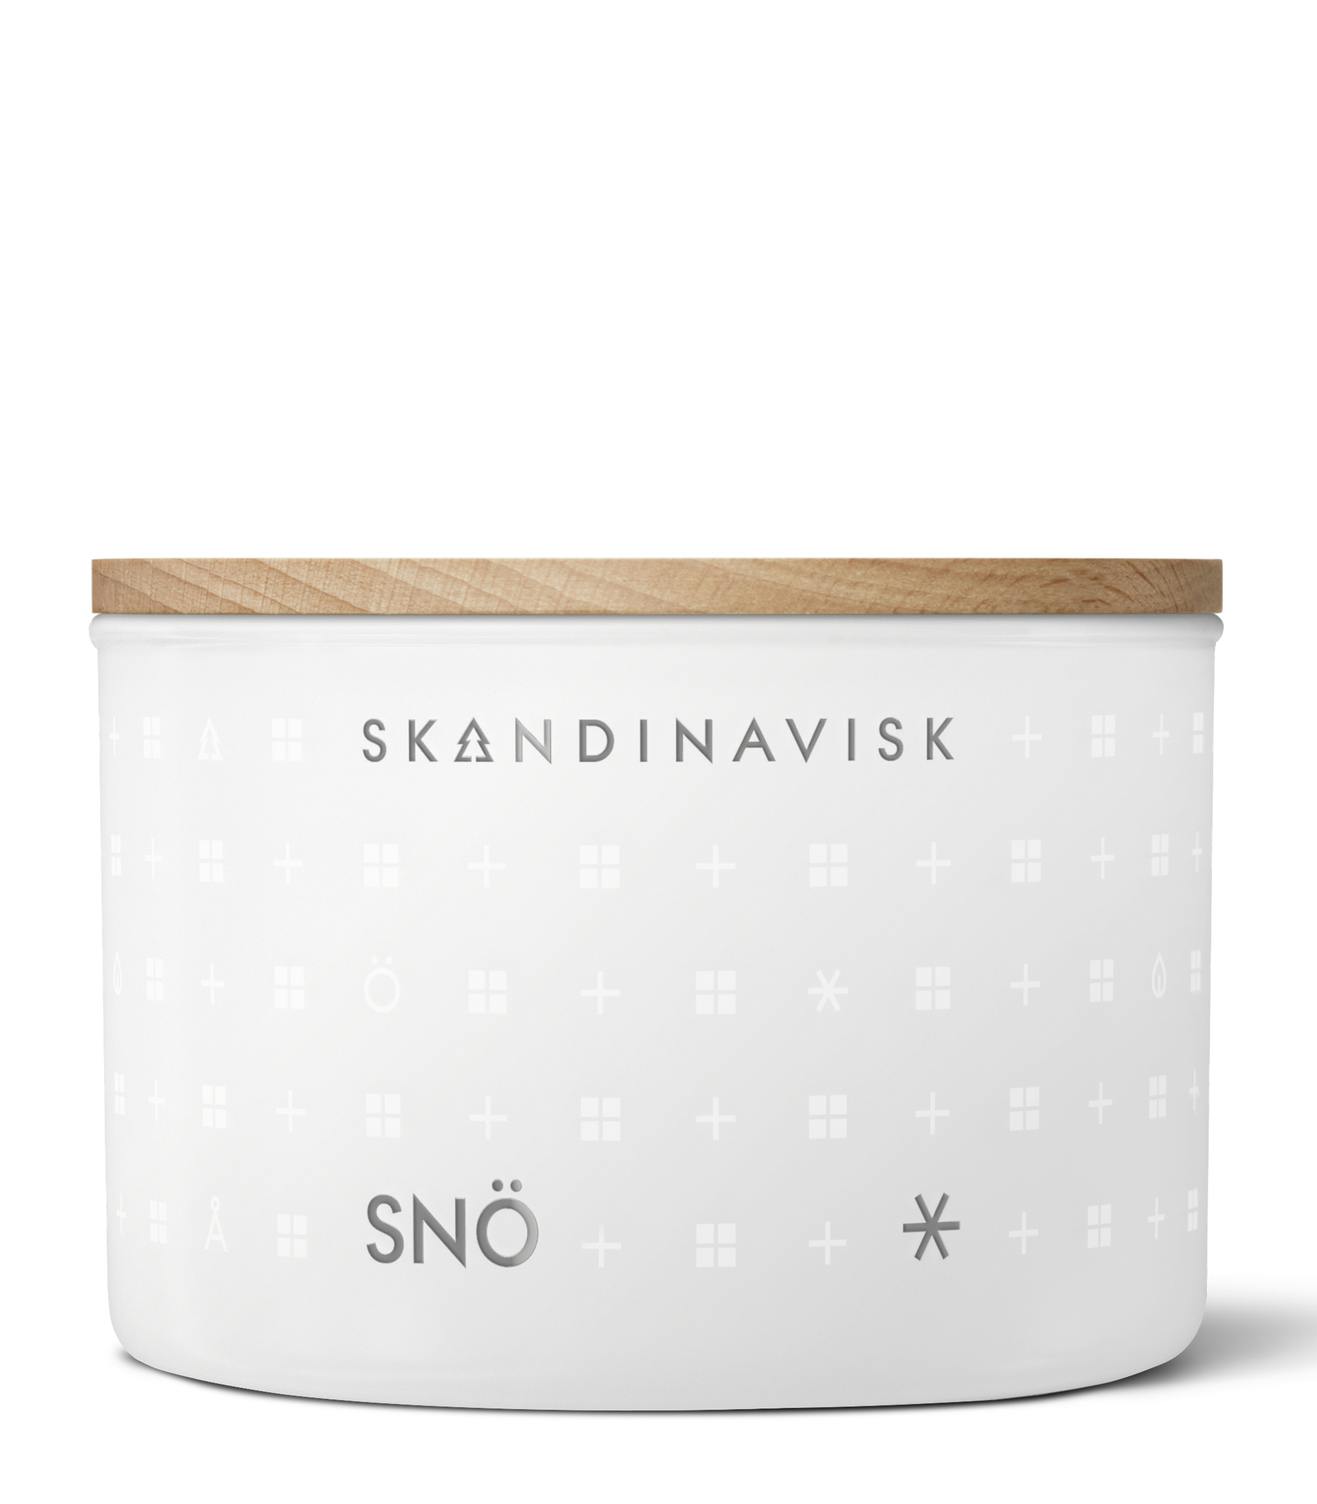 scented candles, vegan candles, organic candles, Skandinavisk, snow, winter candles, Nordic gifts,